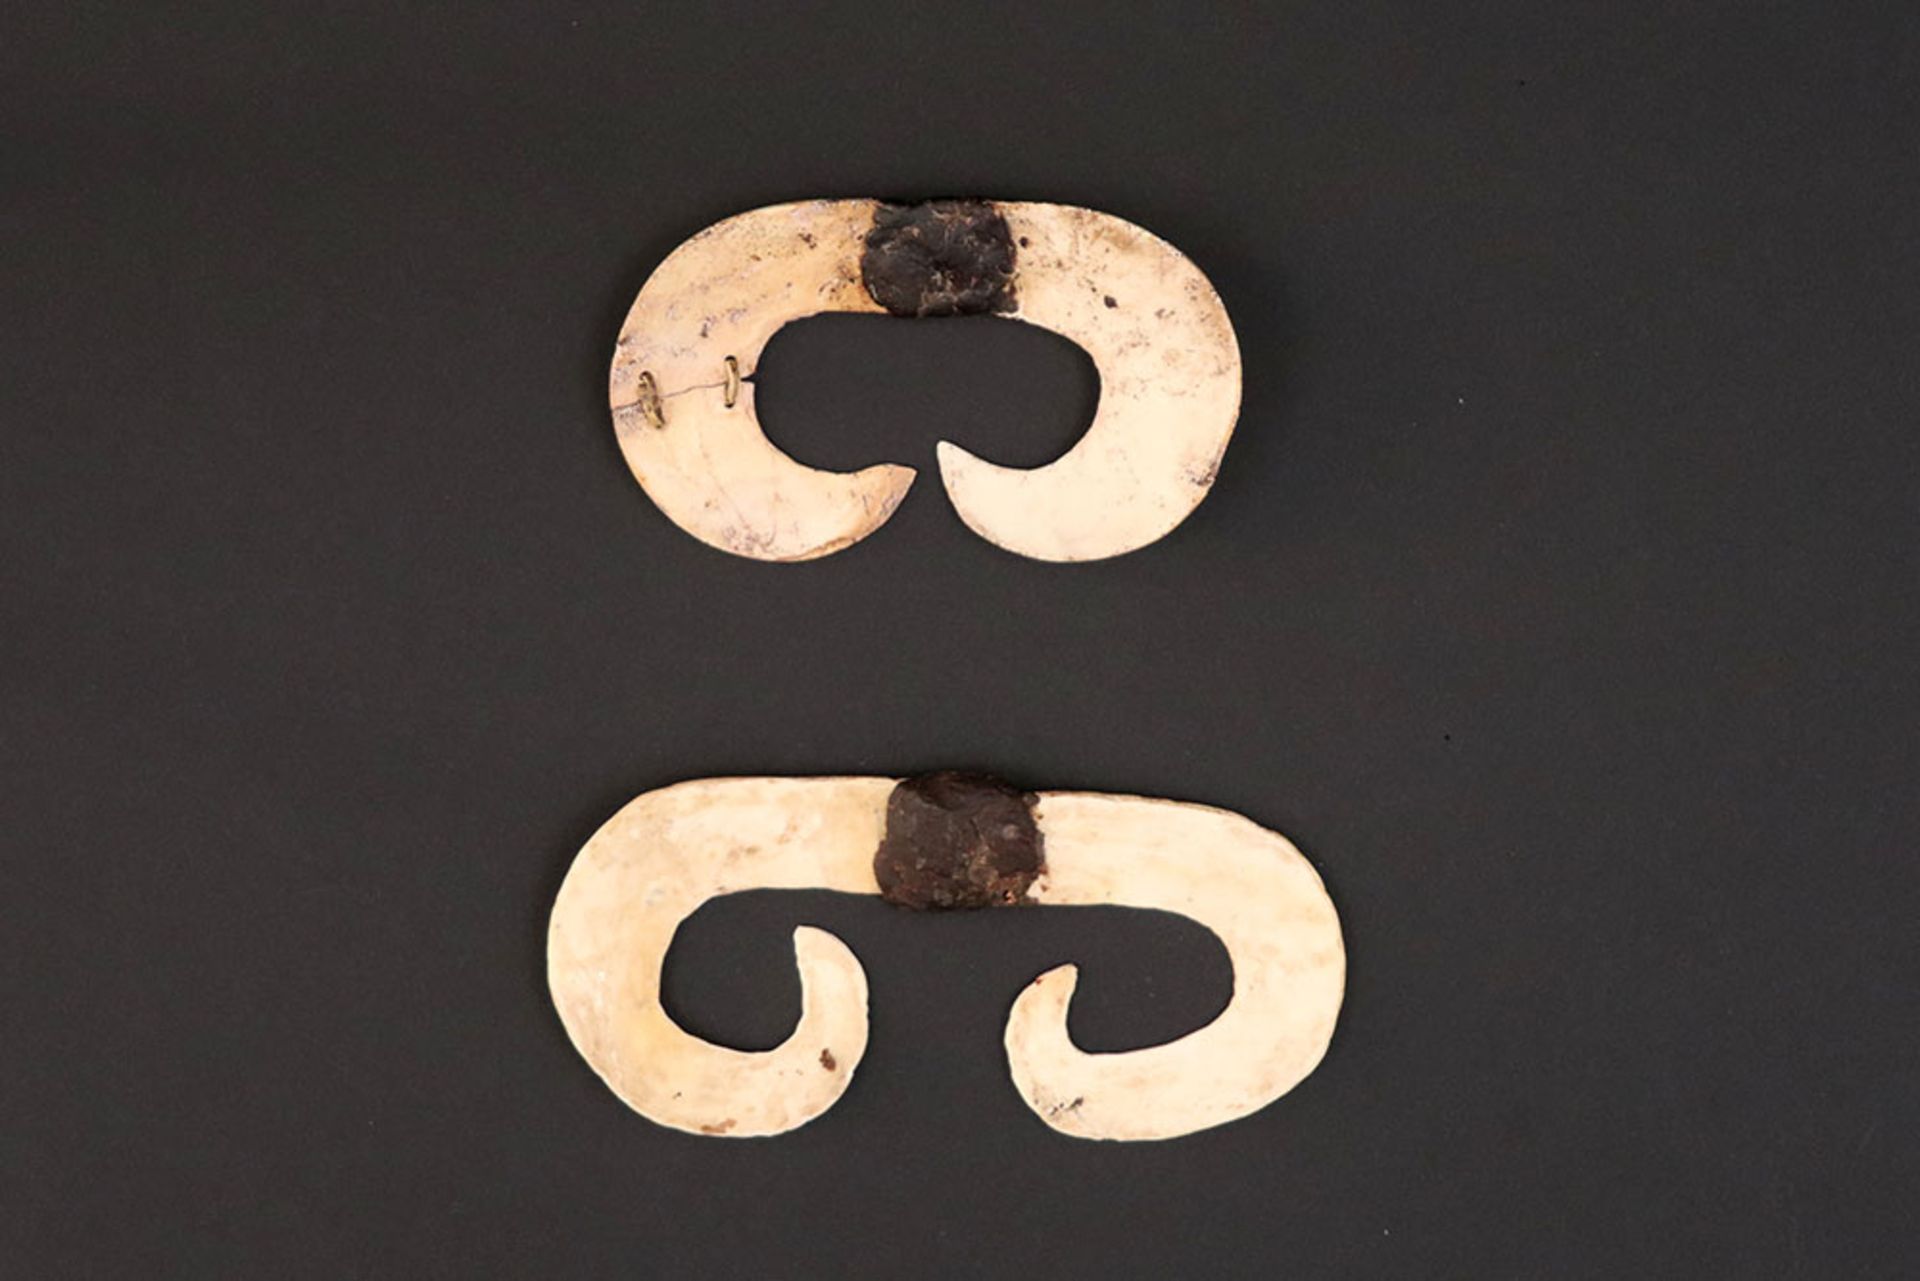 two 1st half of the 20th Cent. Papua New Guinean "Asmat" nose ornaments in shell and resin || - Image 2 of 2